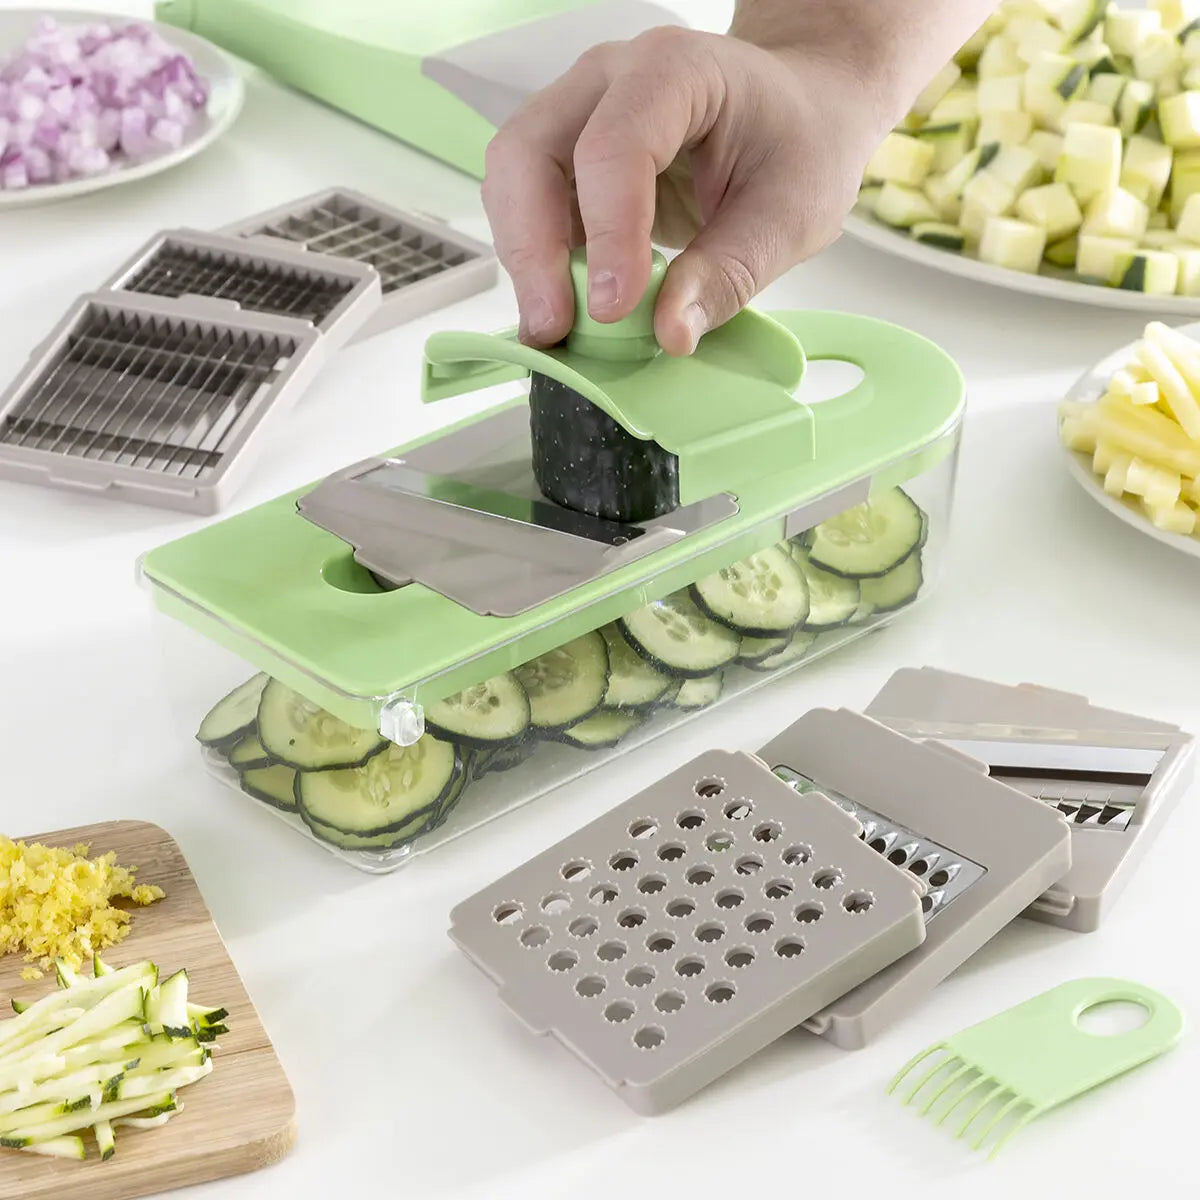 7 in 1 Vegetable Cutter - Grater